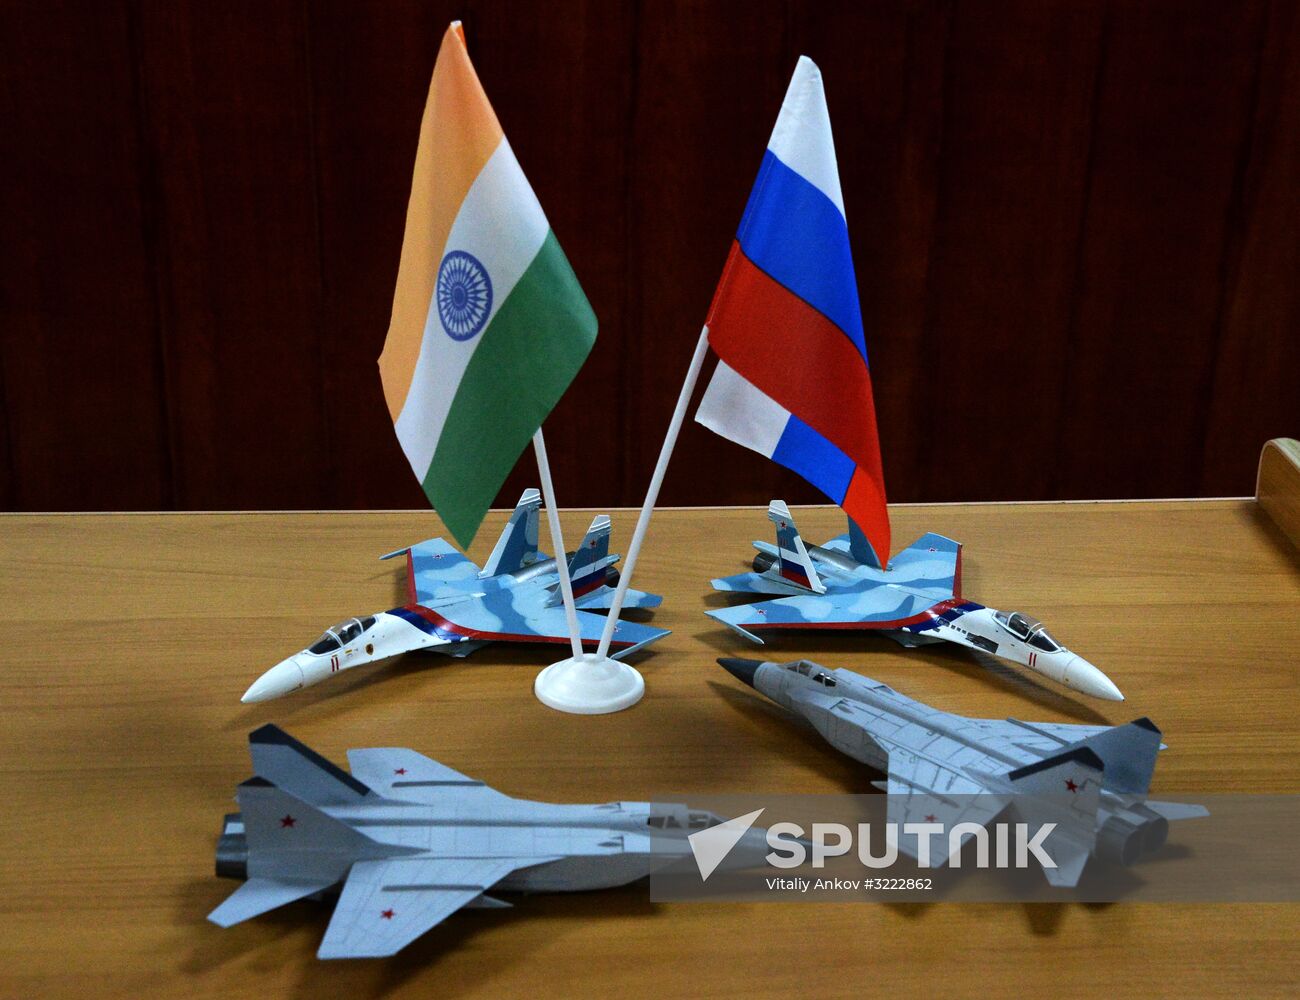 Indra 2017 joint Russian-Indian military exercise